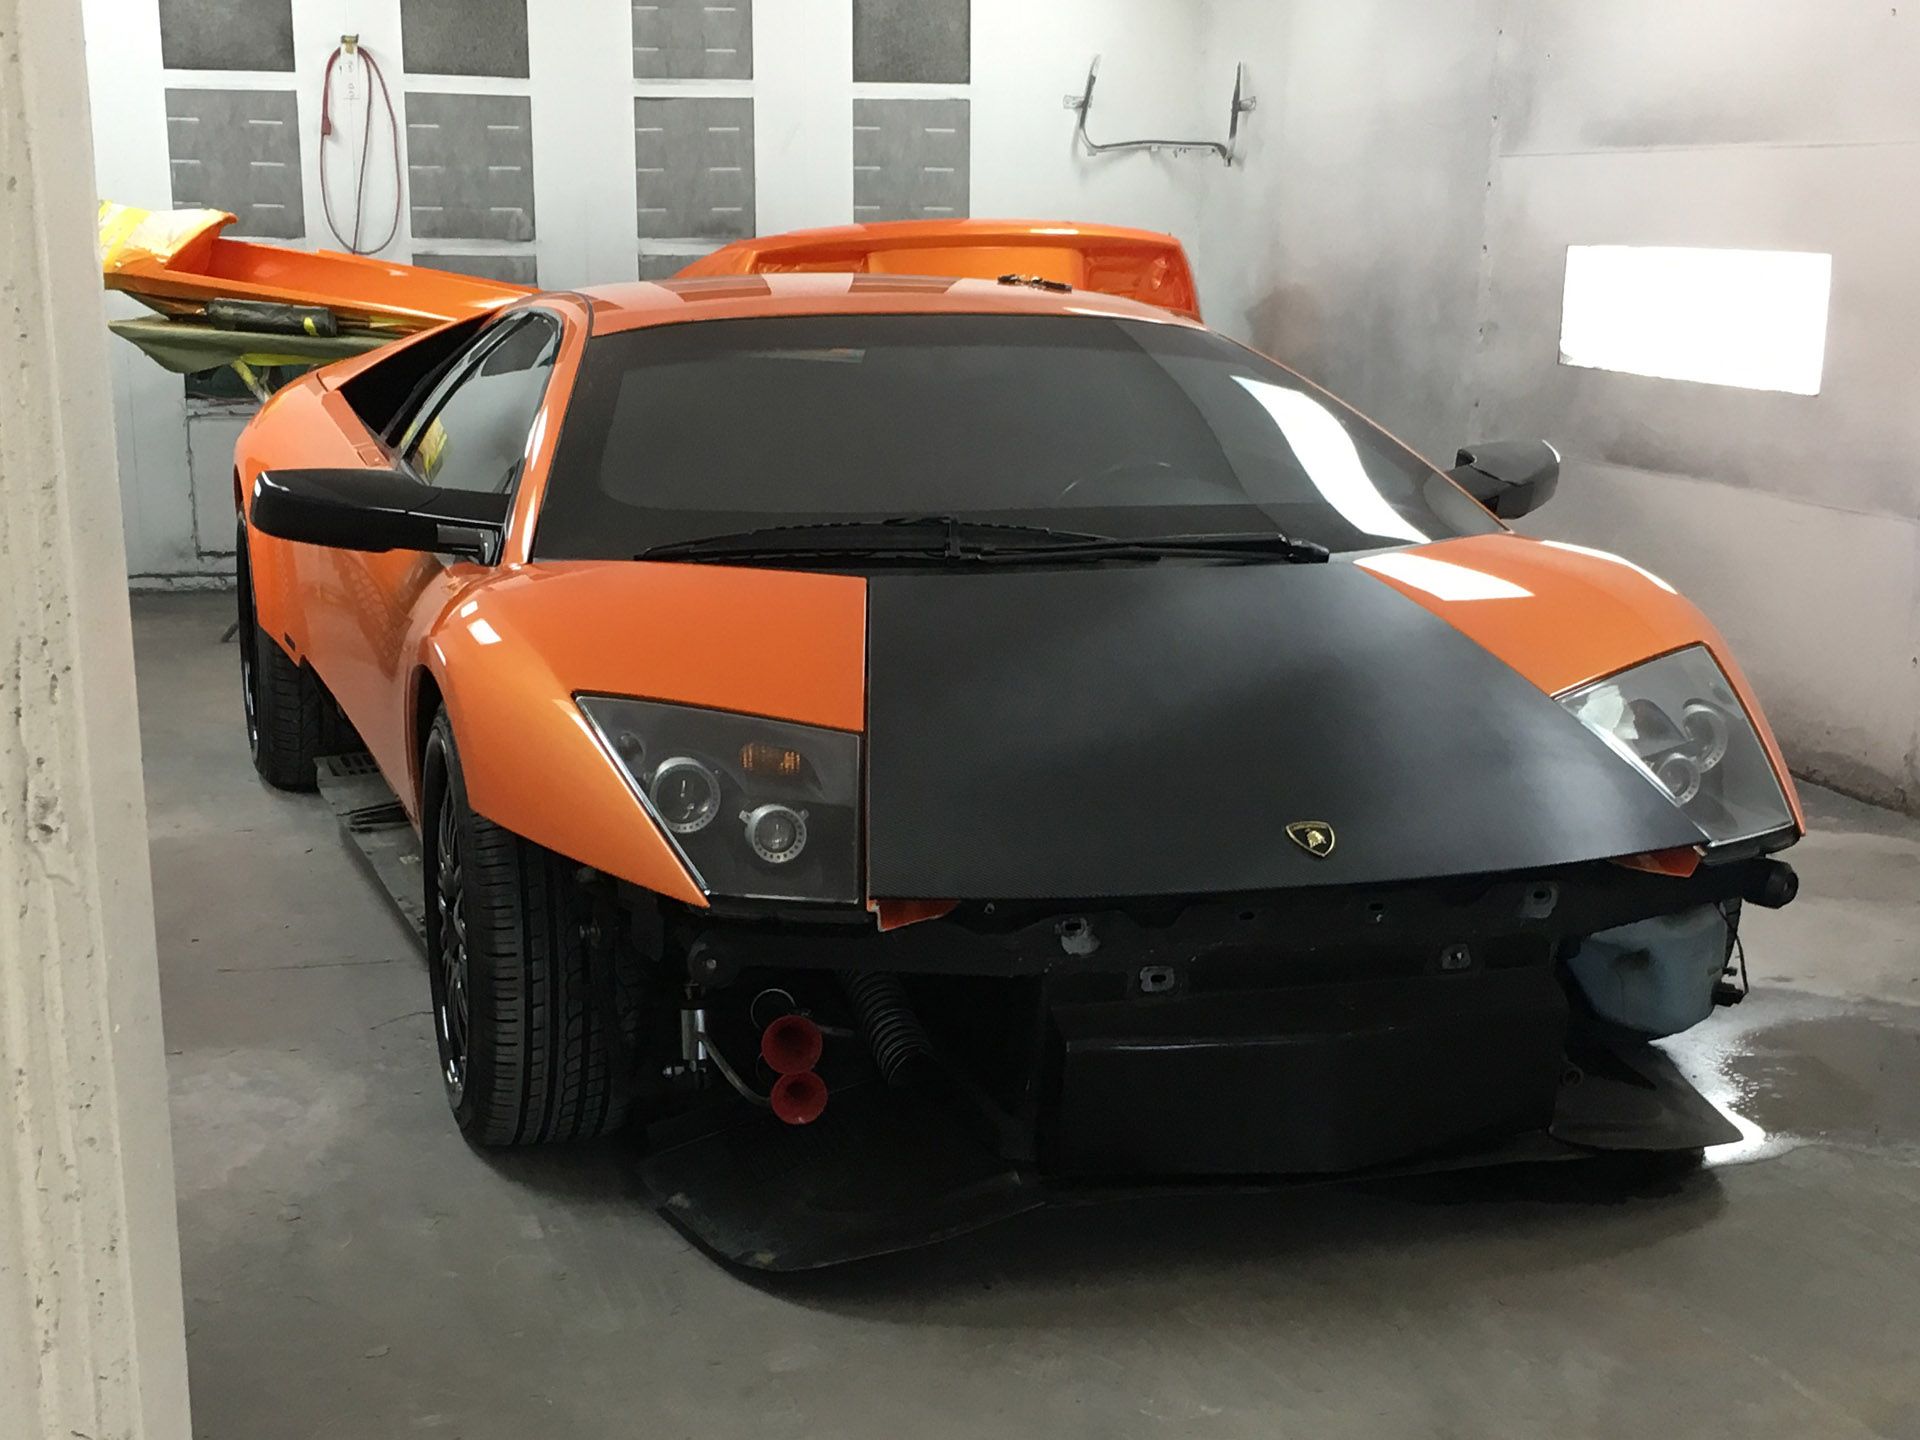 Front view of orange Lambourghini with hood primed